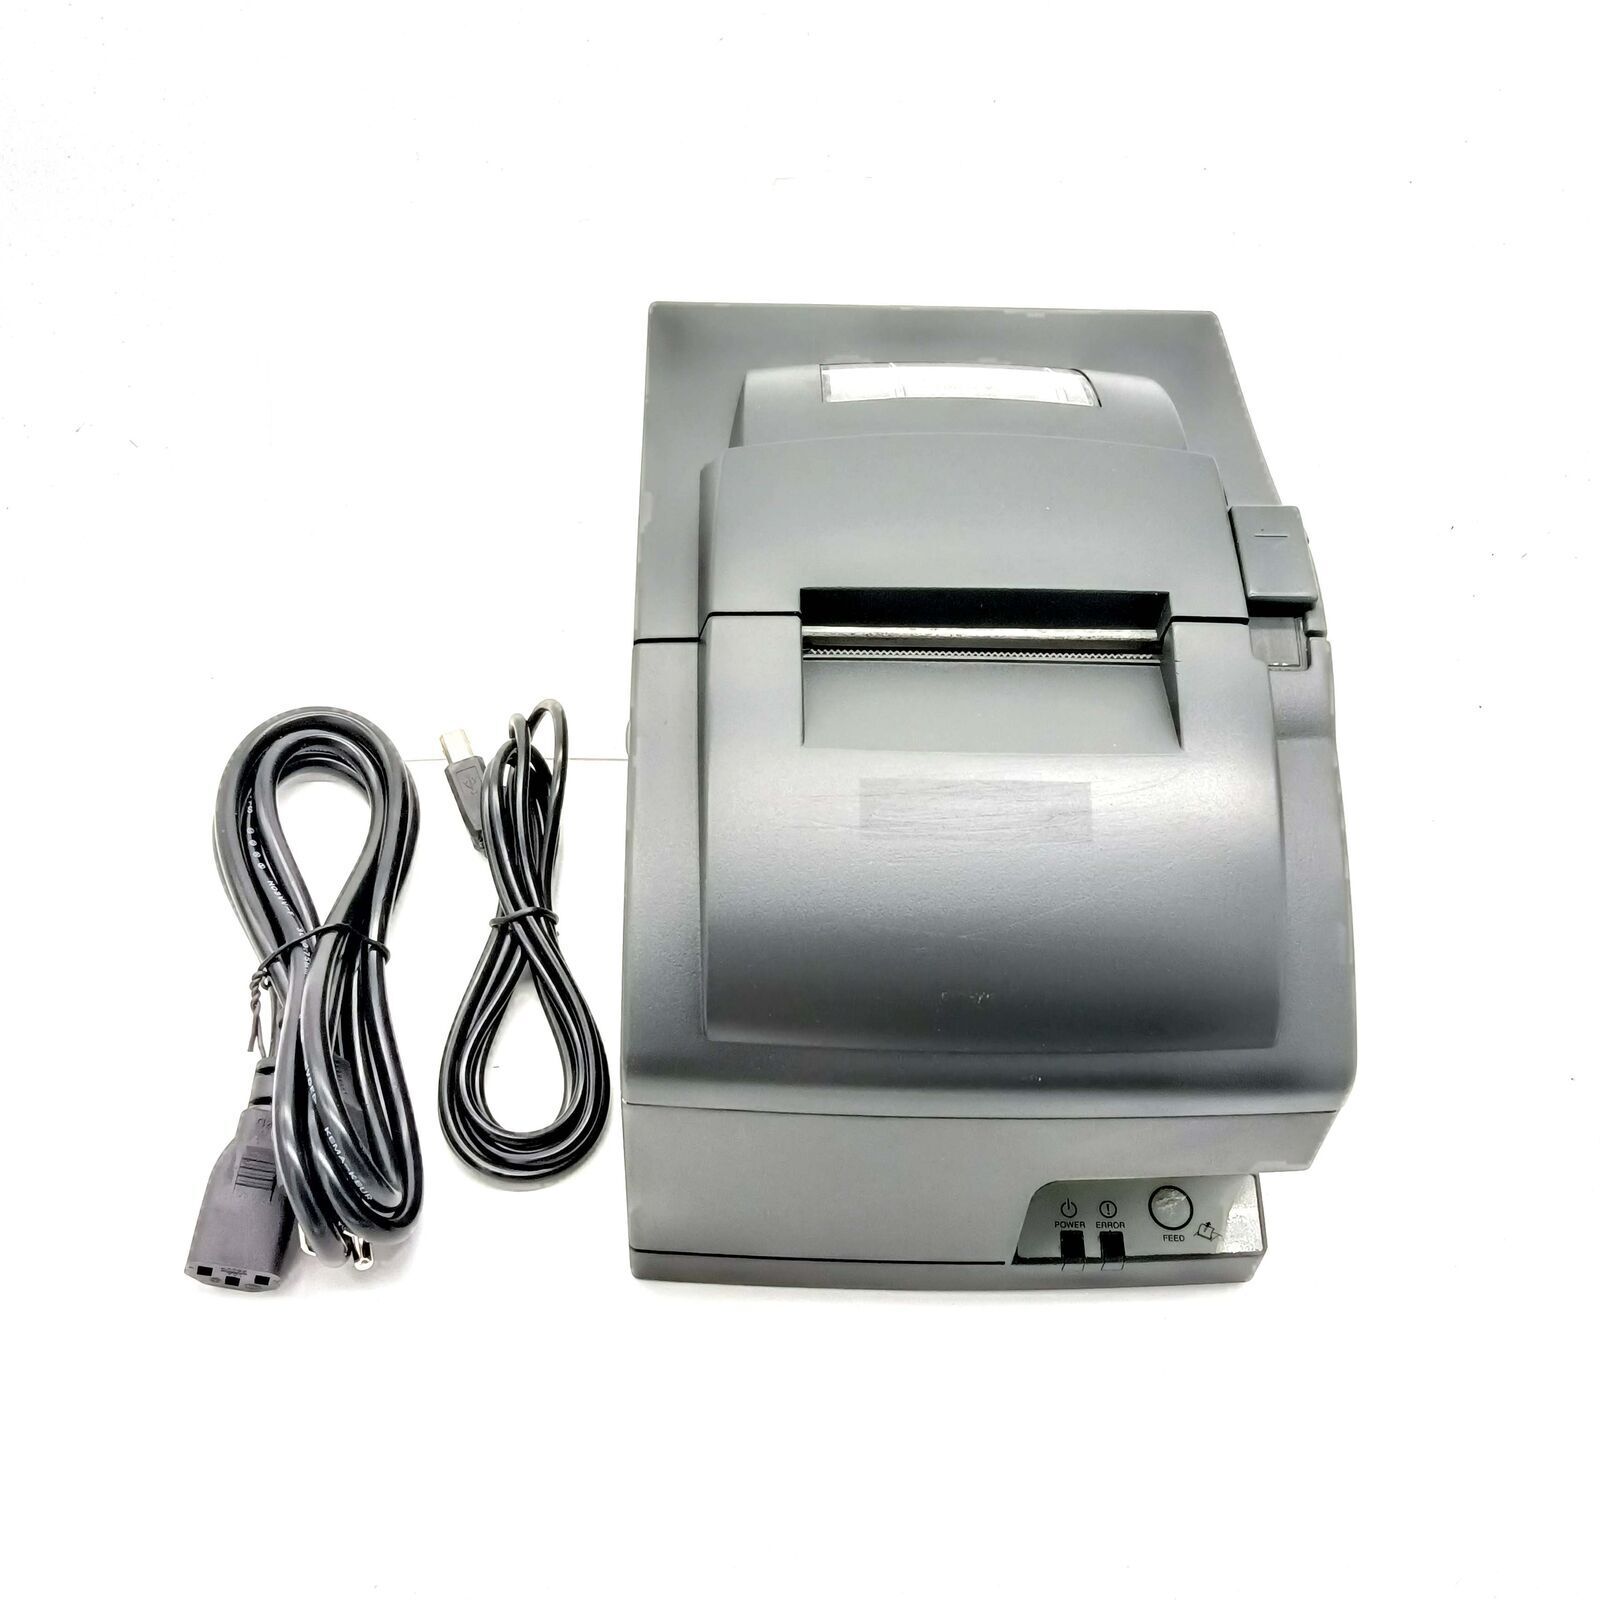 Printer SP747 Impact Receipt SP 700 760 fits for STAR Micronic swith USB port